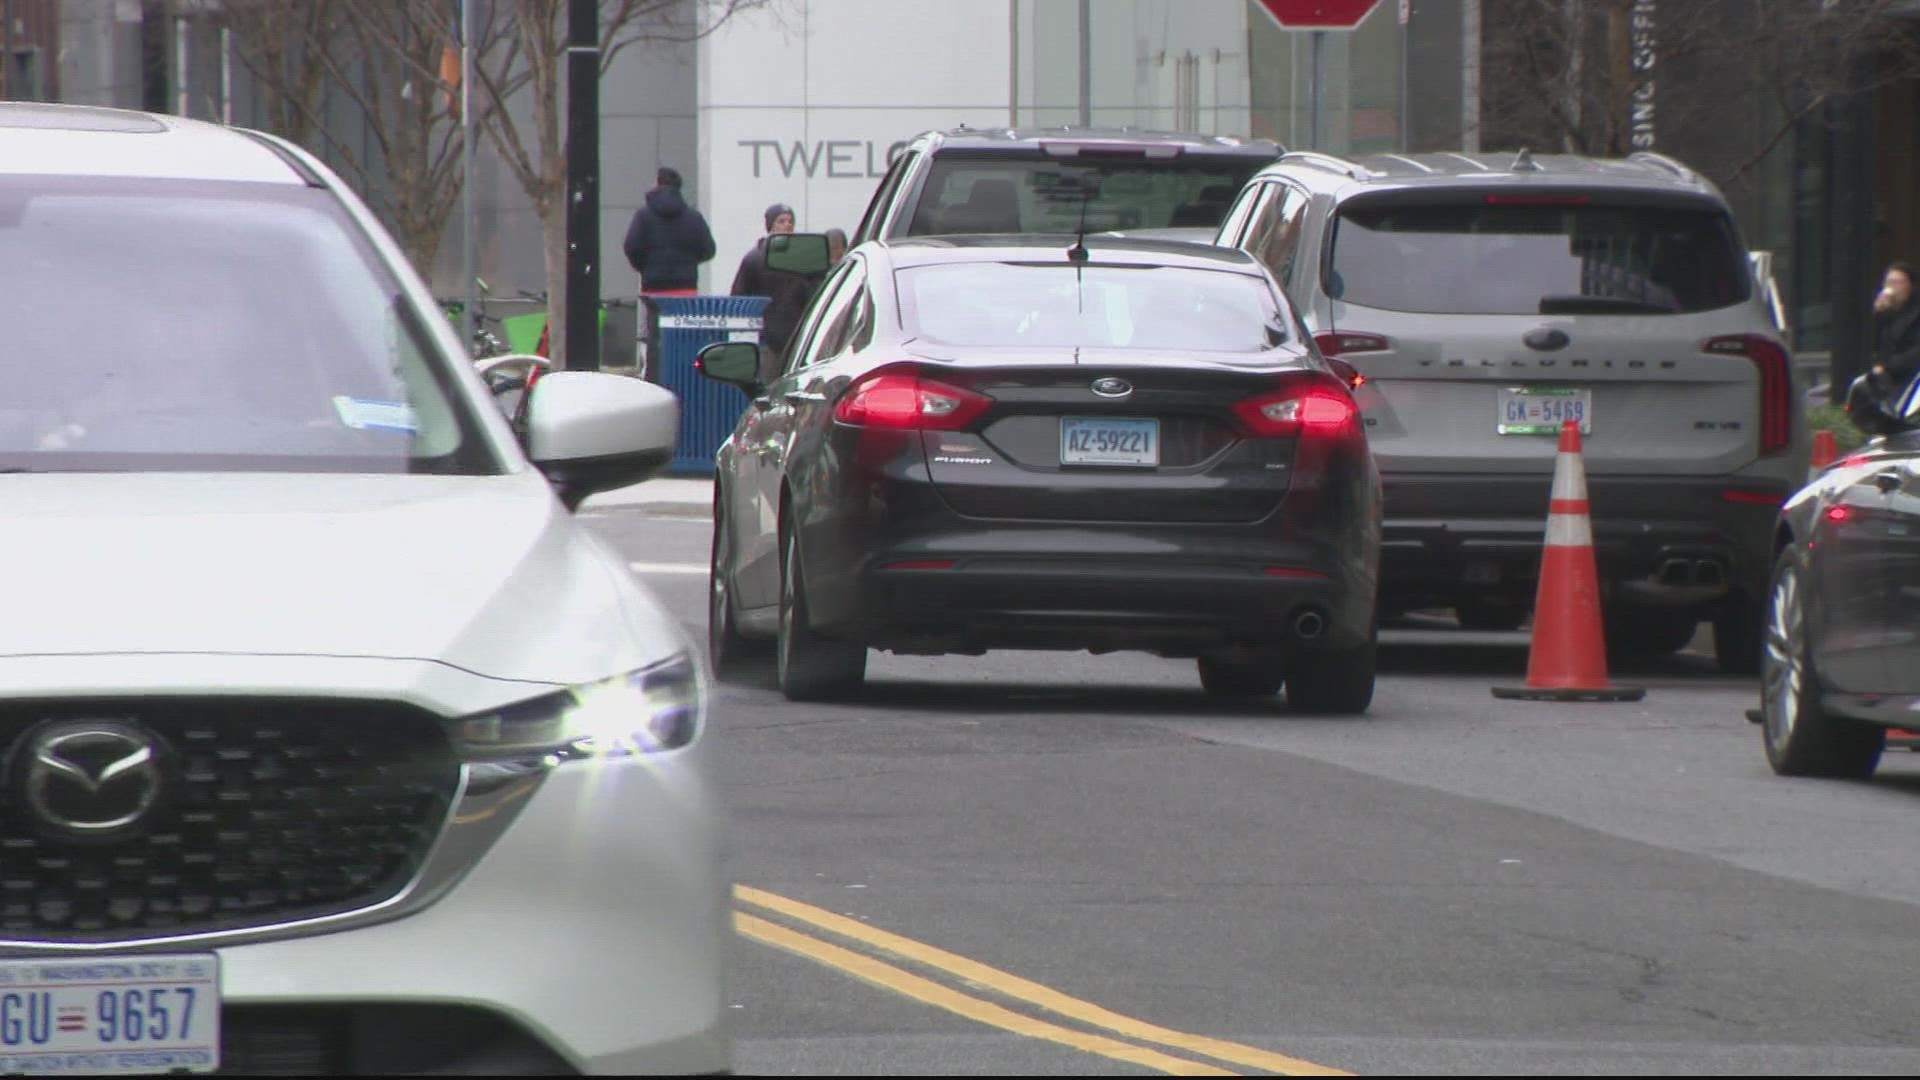 A man was carjacked after he was approached by a group of men with a weapon while he was sitting inside his vehicle at Navy Yard.